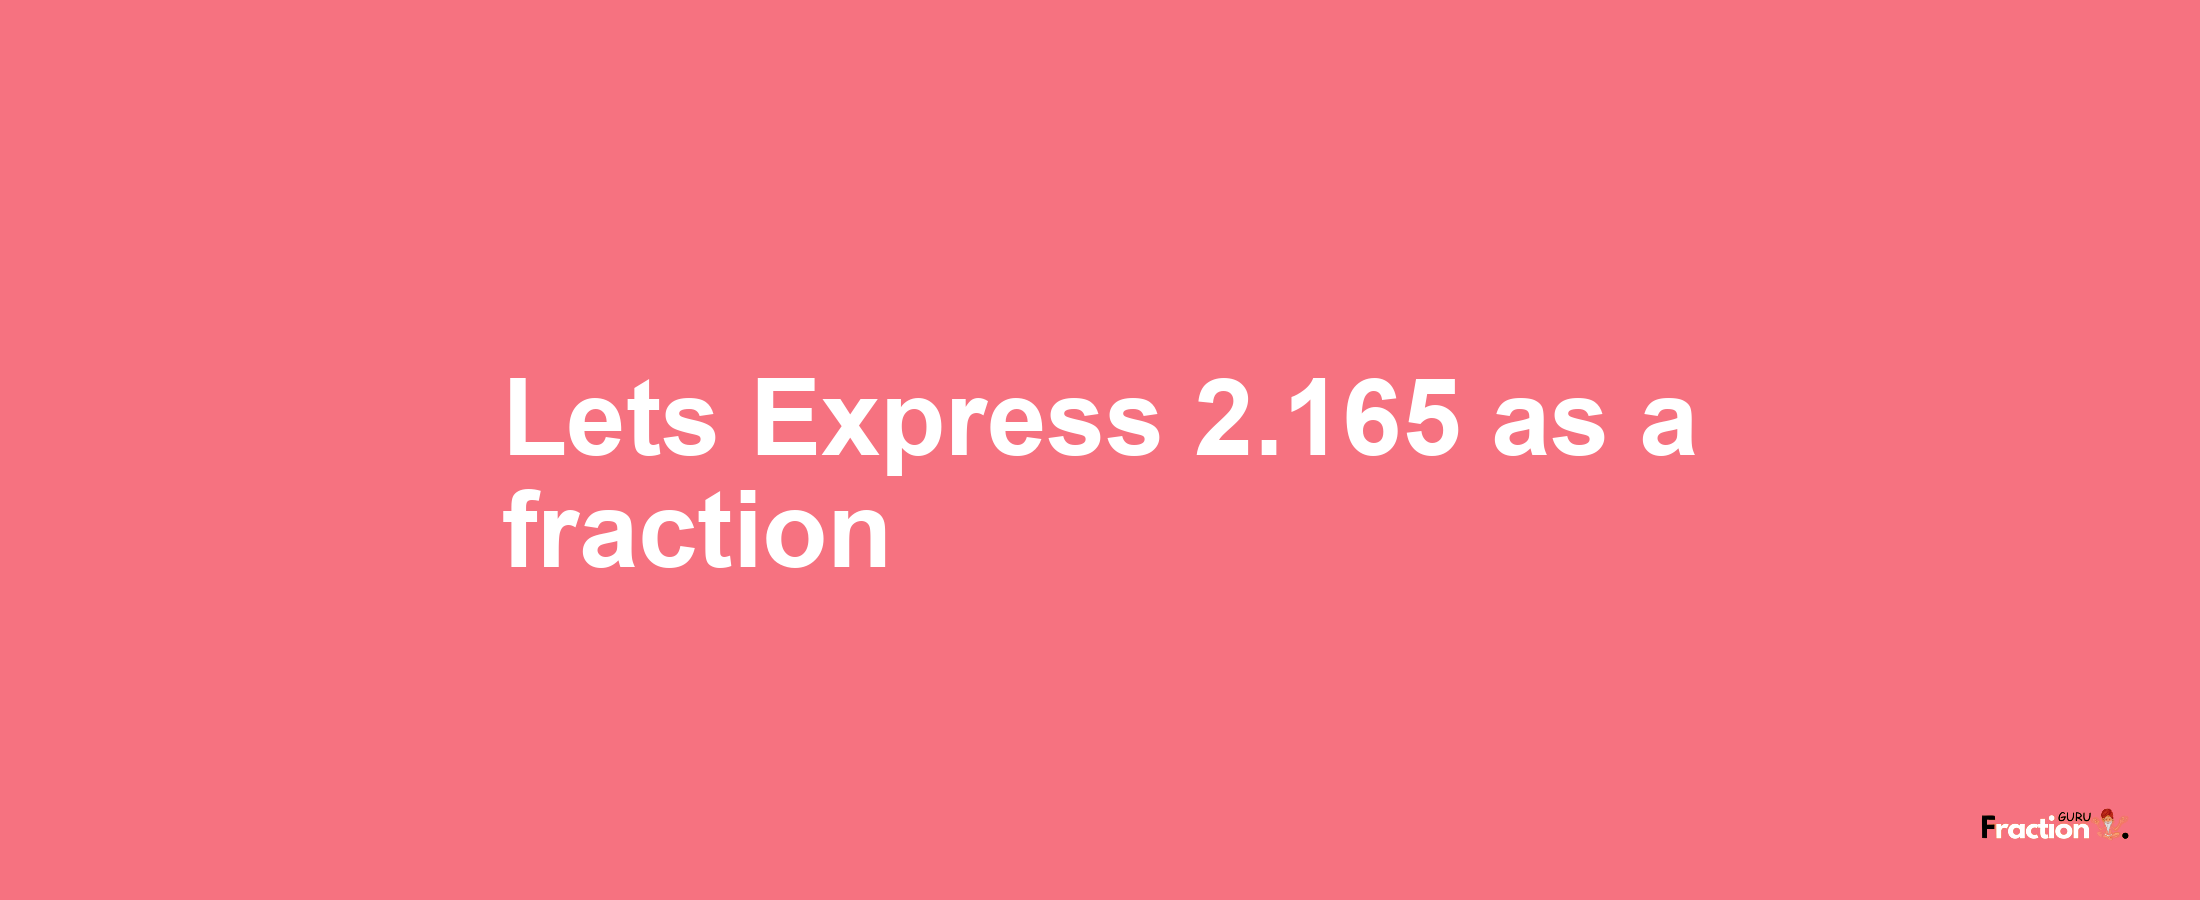 Lets Express 2.165 as afraction